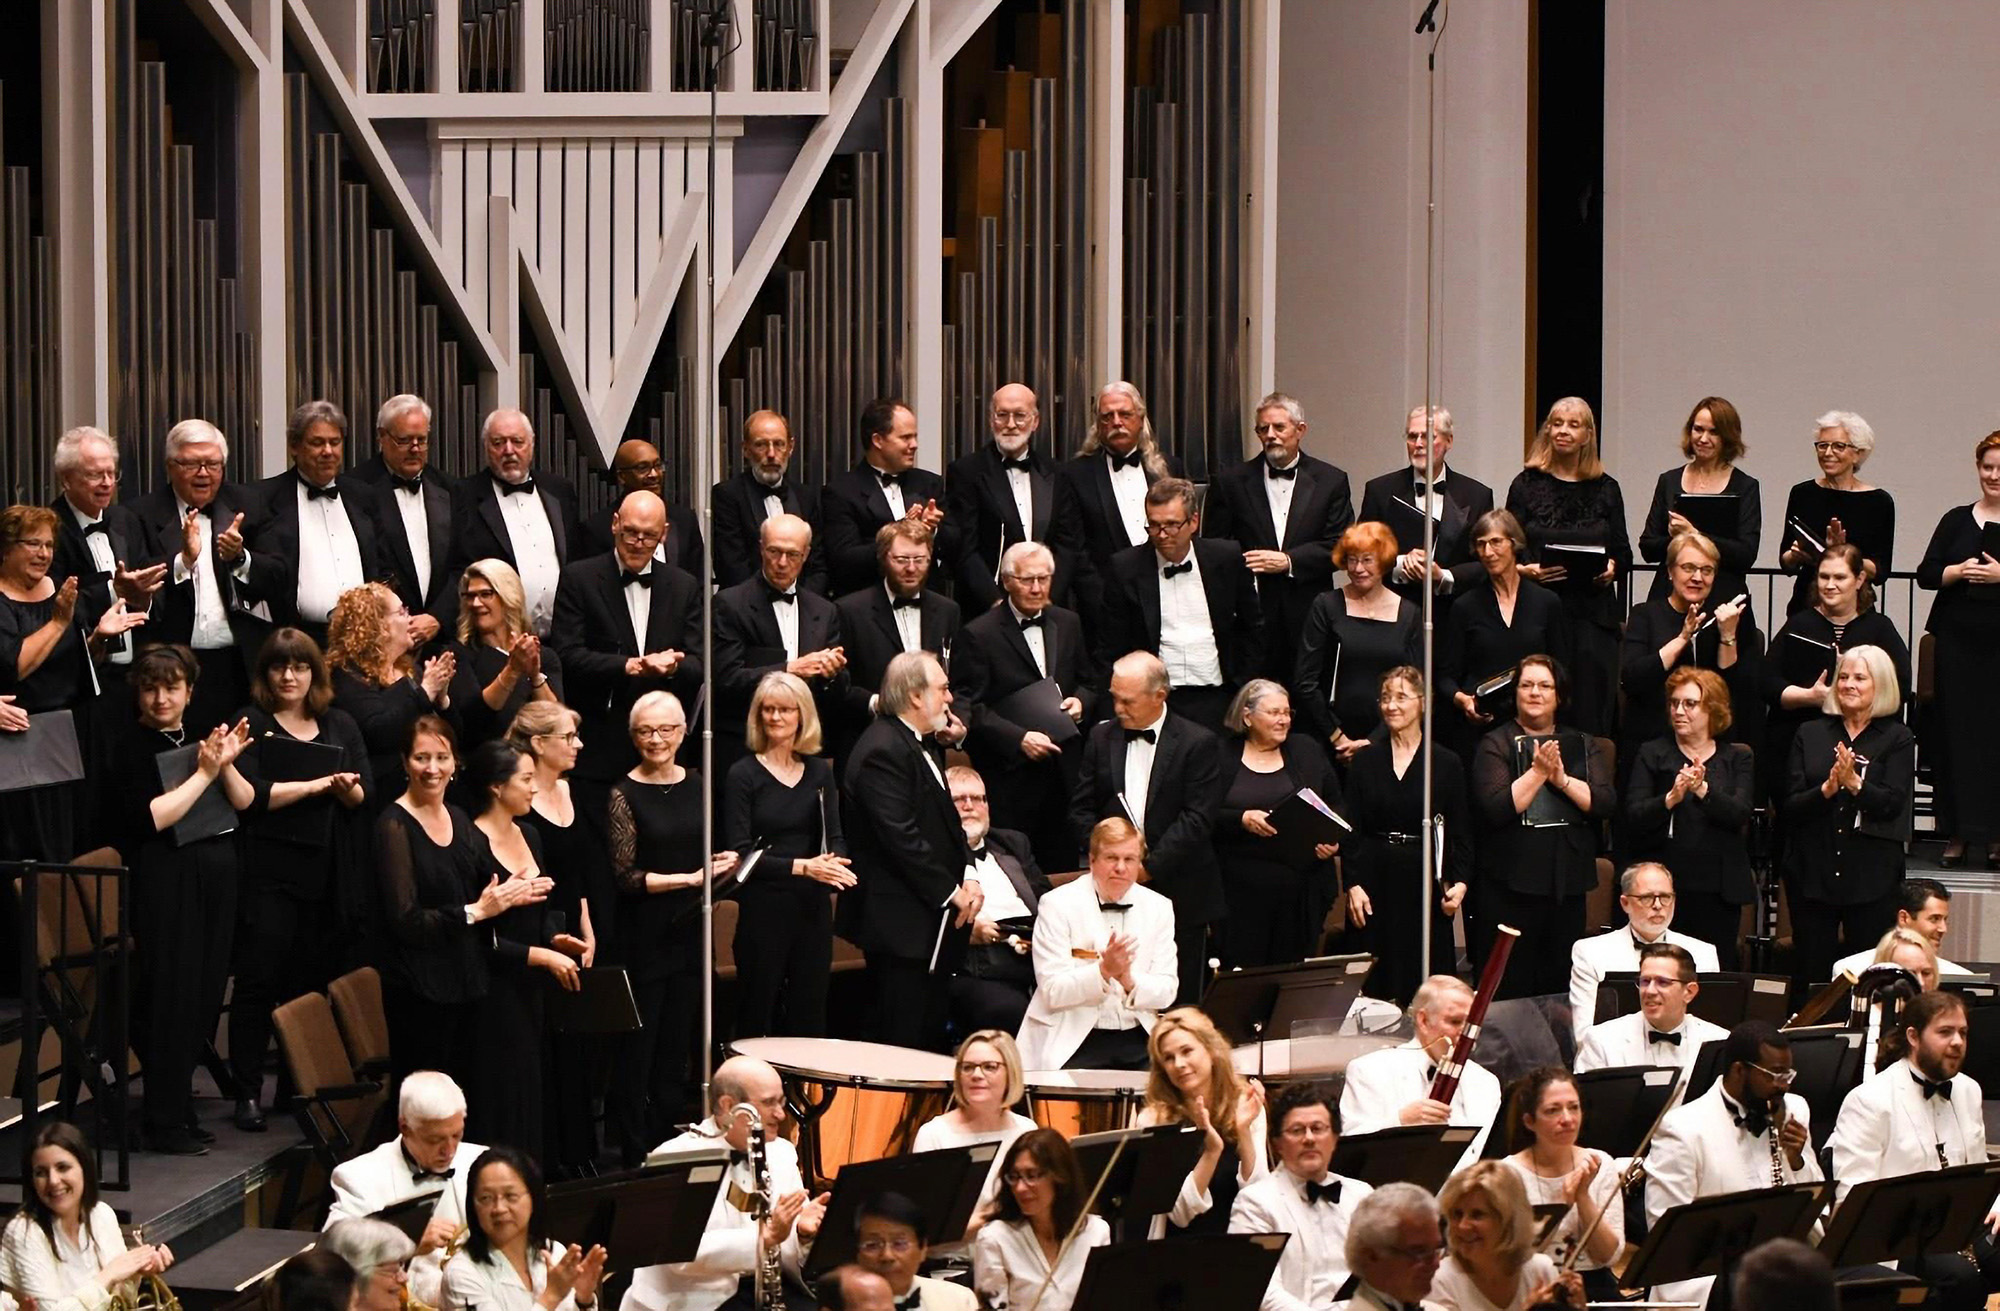 Photo of the Bellingham Festival of Music Orchestra with the Chorus behind them on stage.